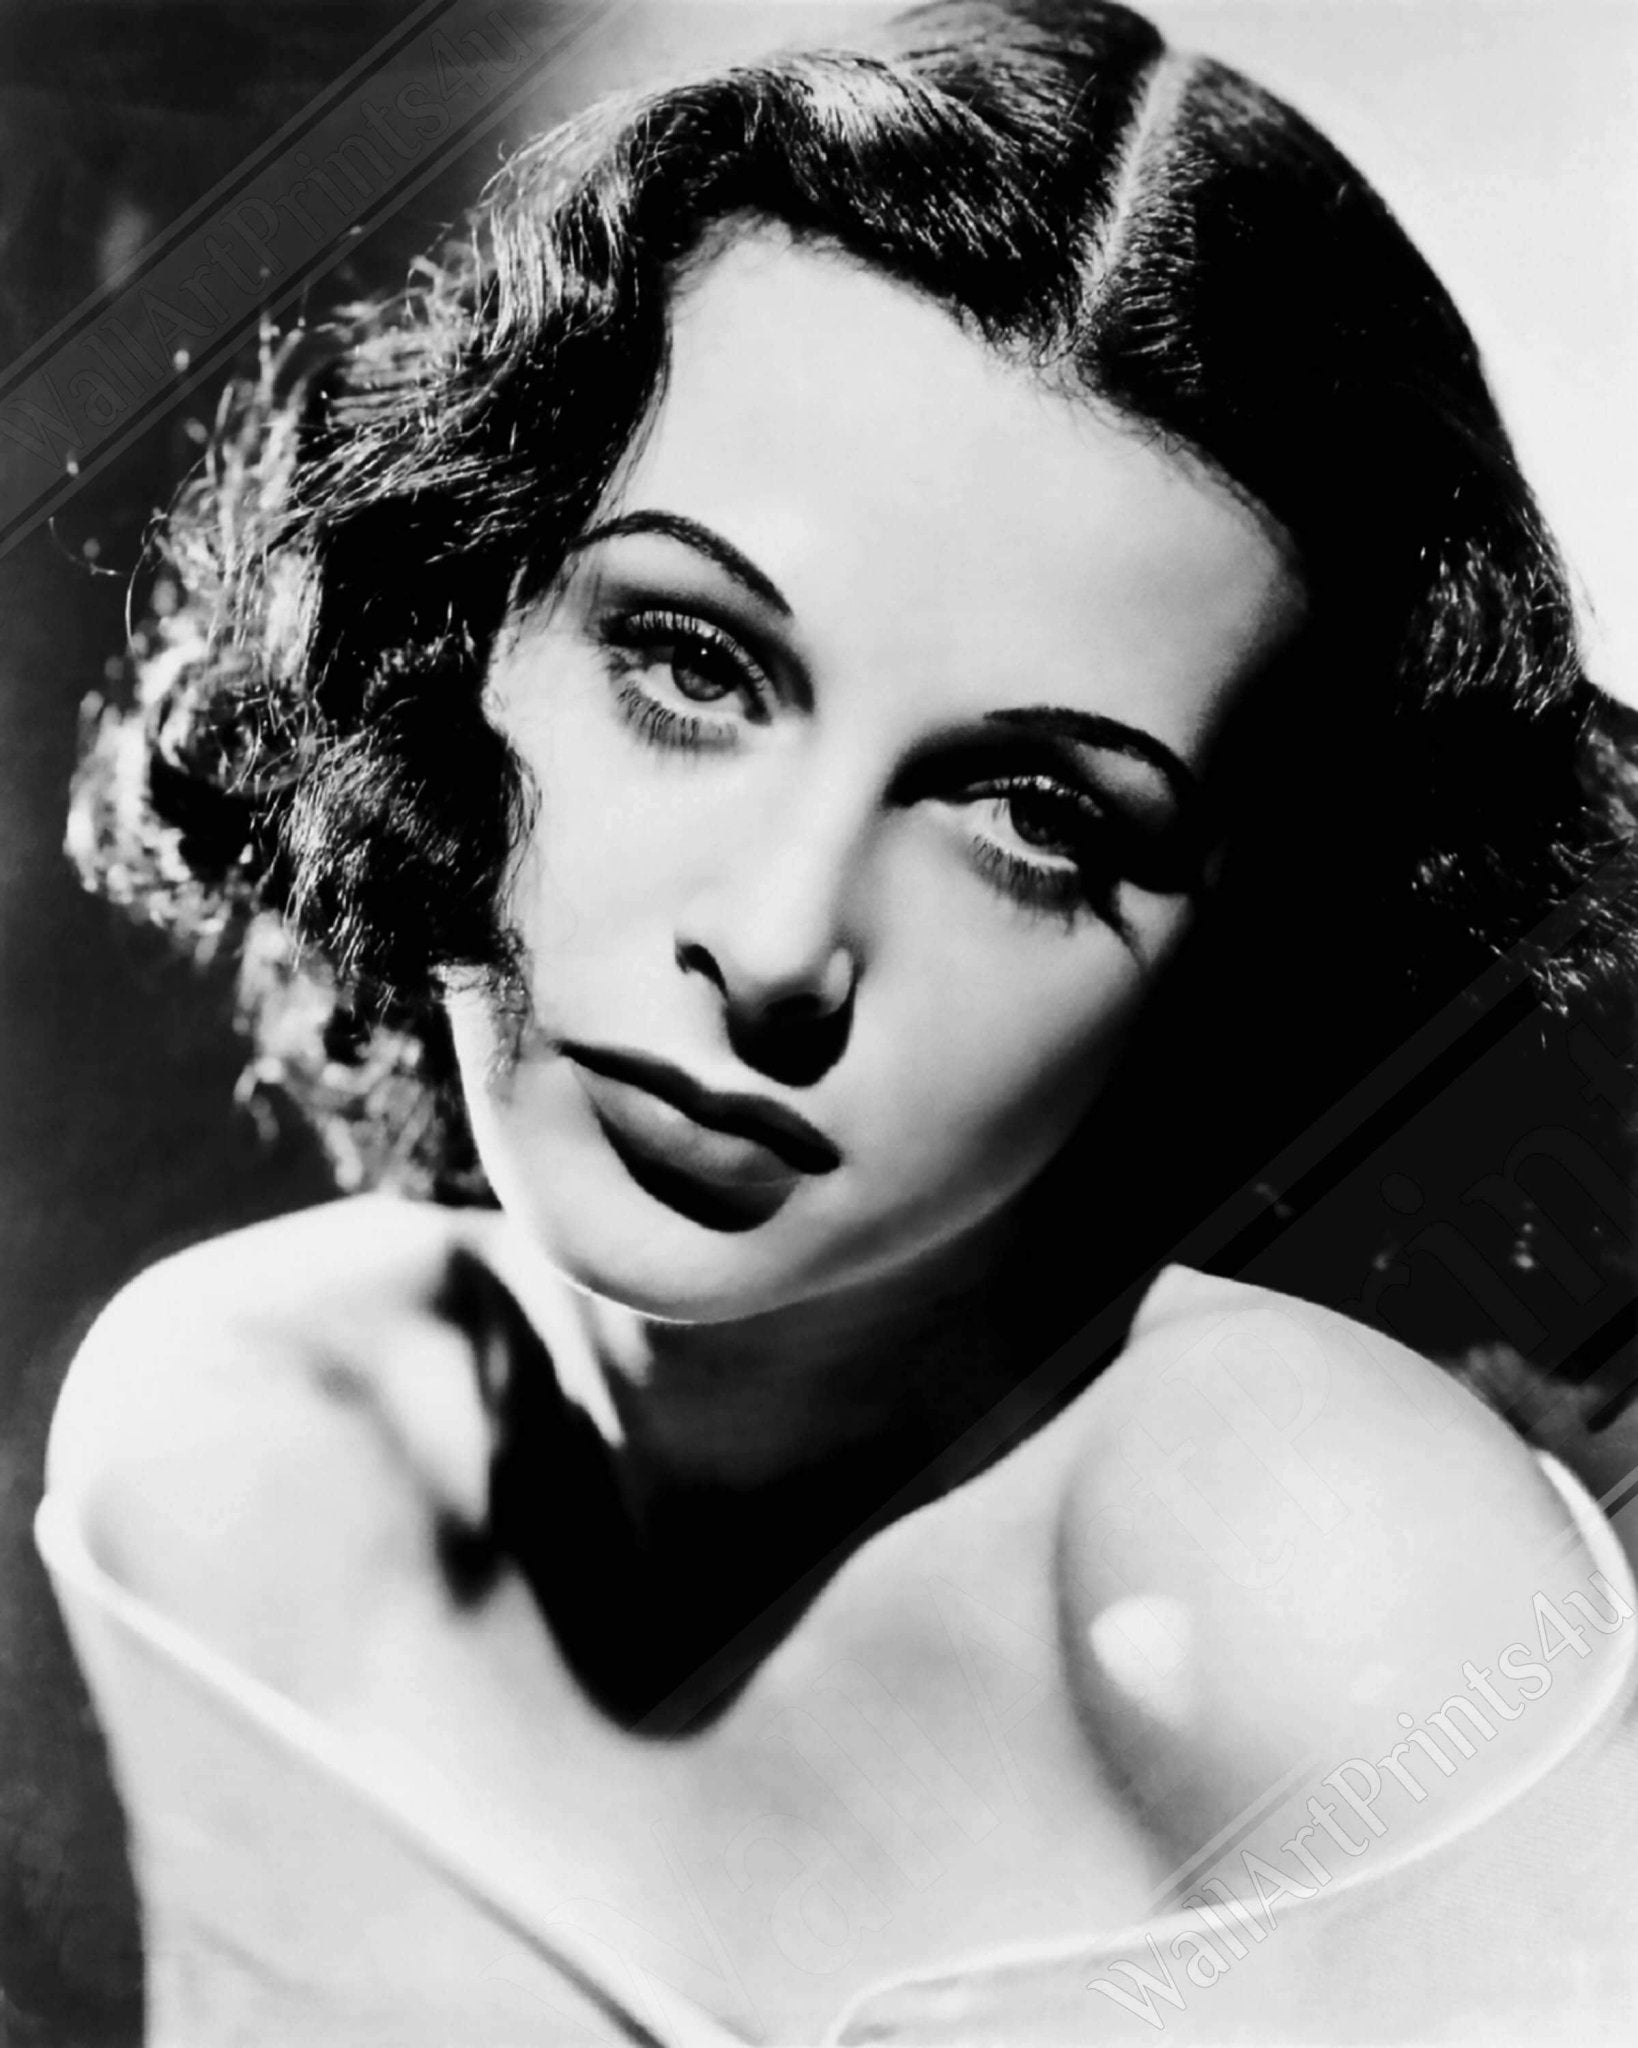 Hedy Lamarr Canvas, Most Beautiful Ever To Appear In Films, Vintage Photo - Iconic Hedy Lamarr Canvas Print - Hollywood Silver Screen Star - WallArtPrints4U